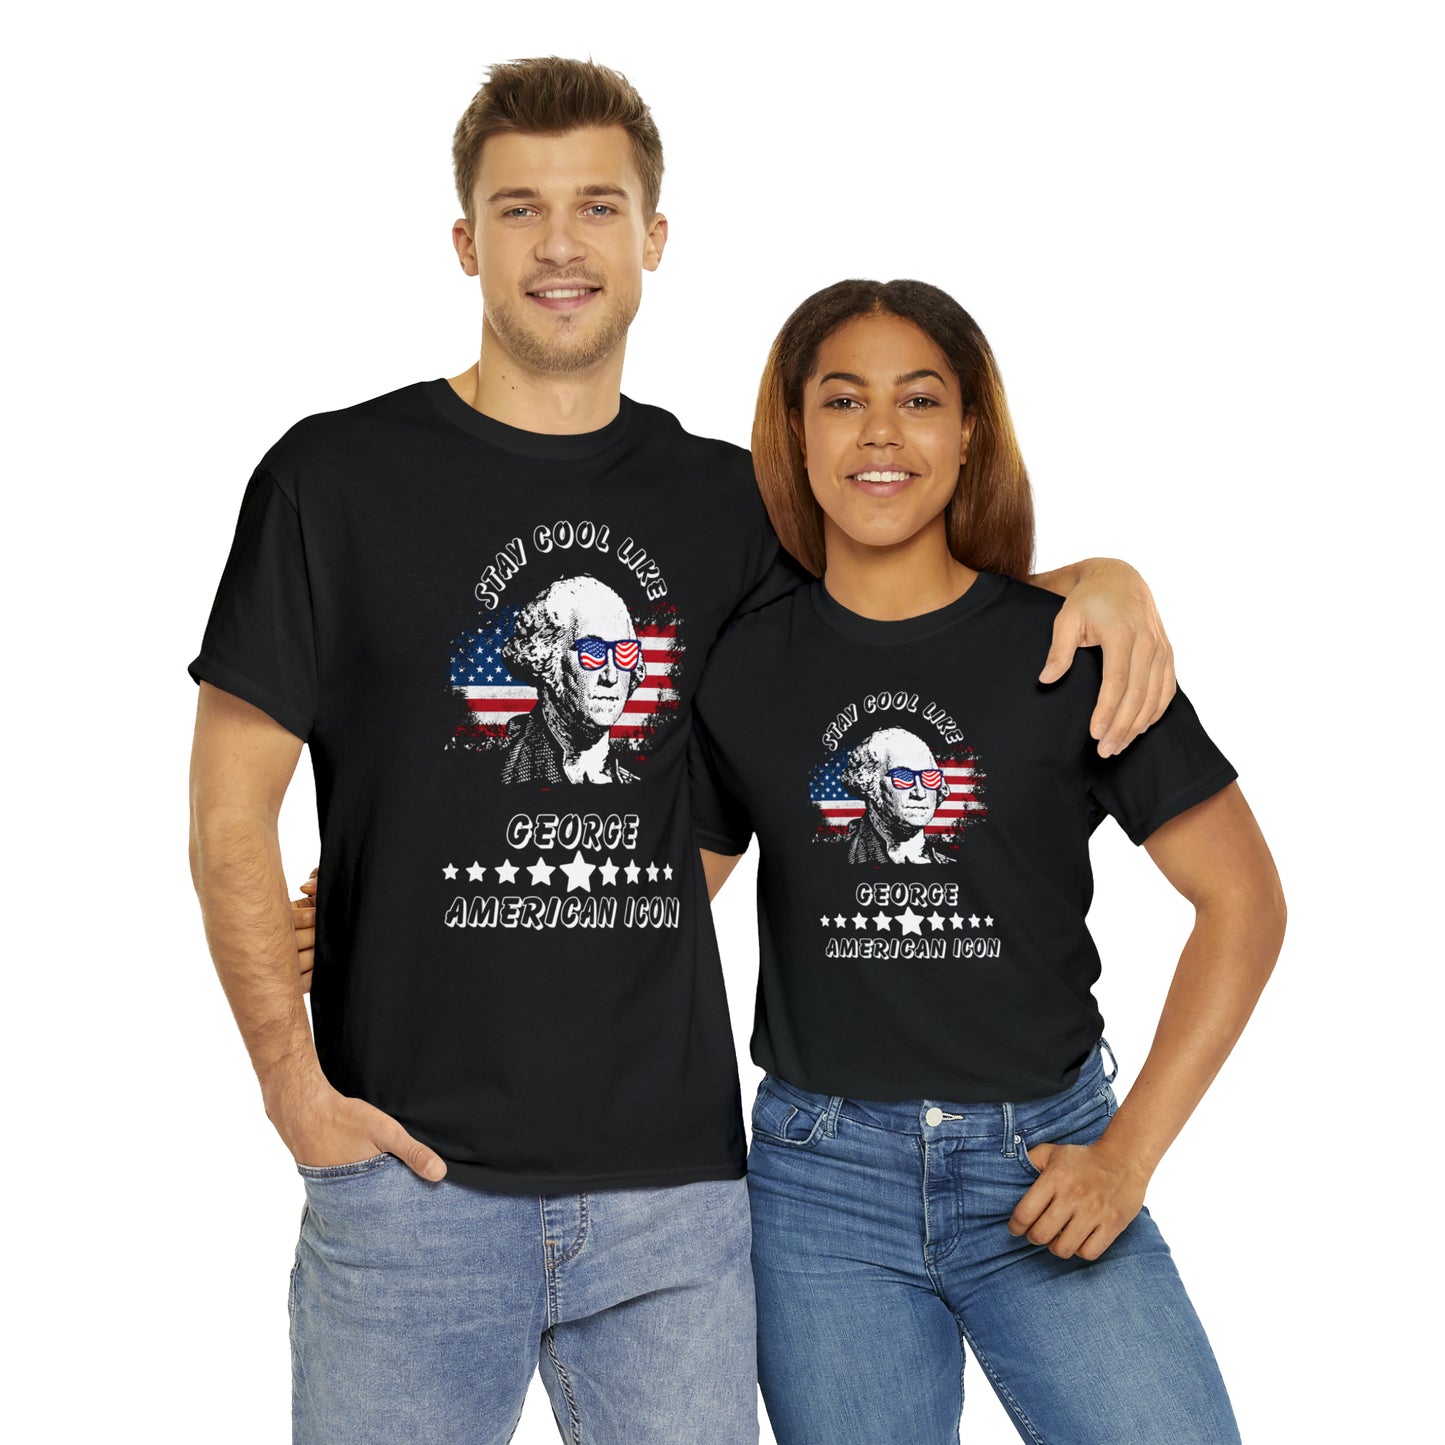 Feel the revolutionary spirit with our George T-shirts,Modern T-shirt for Men, perfect gift